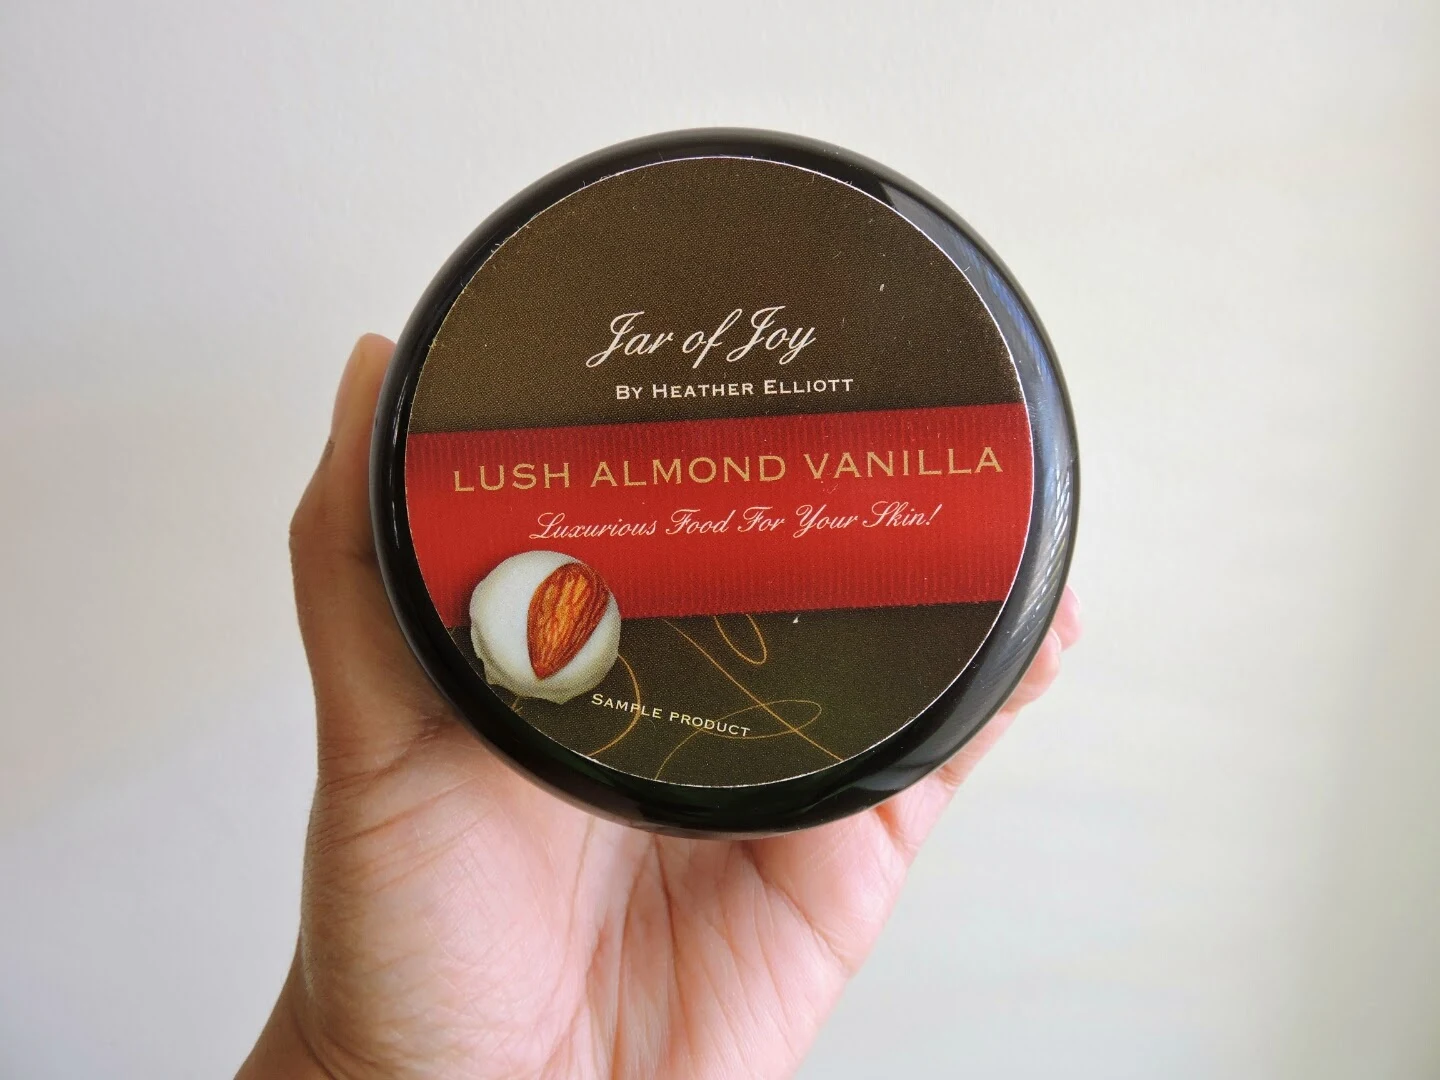 Goodbye Winter Skin with Jar of Joy Body Souffle and Giveaway Ends 4/7  via www.productreviewmom.com